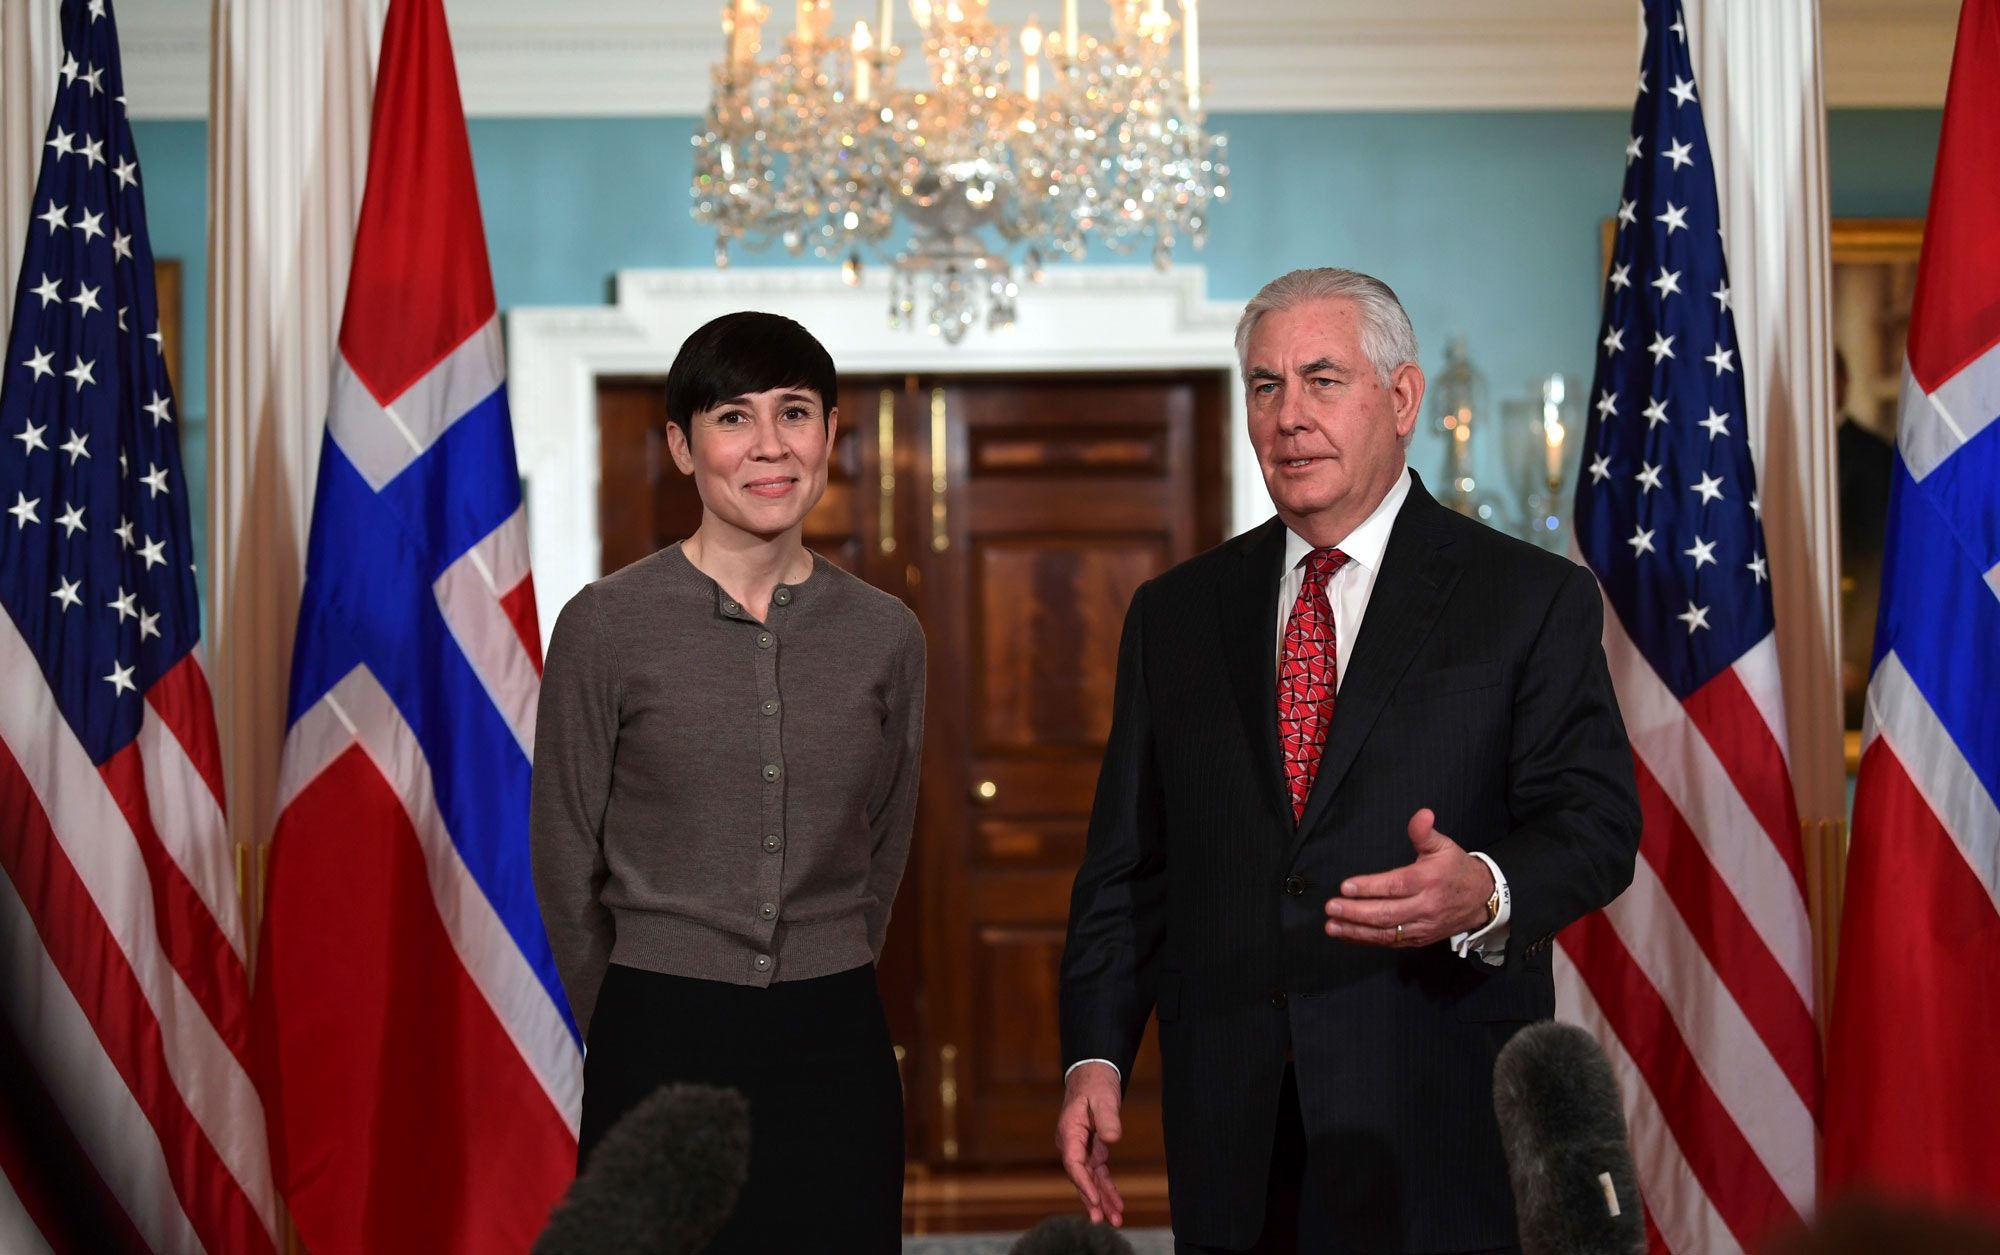 U.S. Secretary of State Rex Tillerson, right, talks as he stands with Norwegian Foreign Minister Ine Marie Eriksen Soreide, left, at the State Department in Washington, Thursday, Jan. 11, 2018.